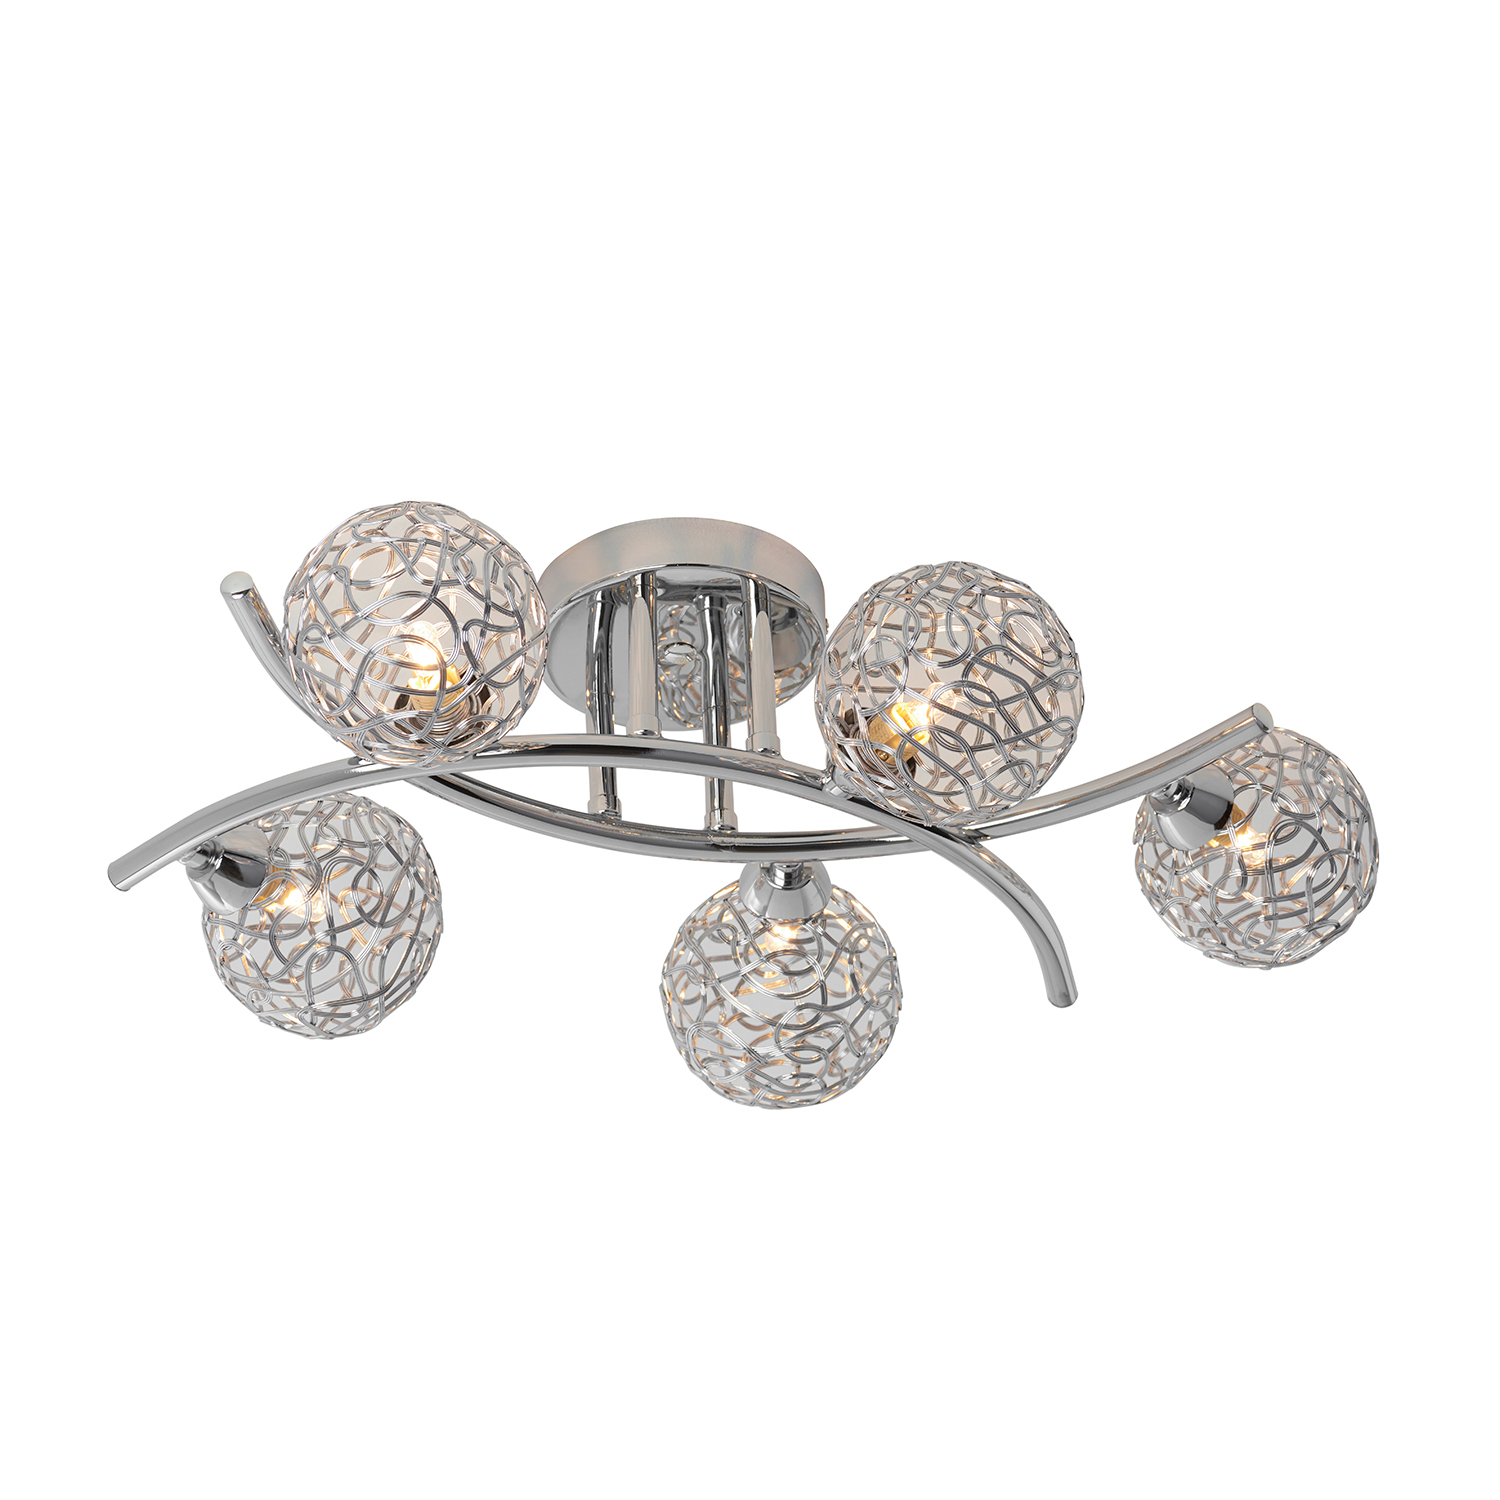 Silver 5 Sphere Electrical Fitting Ceiling Light Image 1